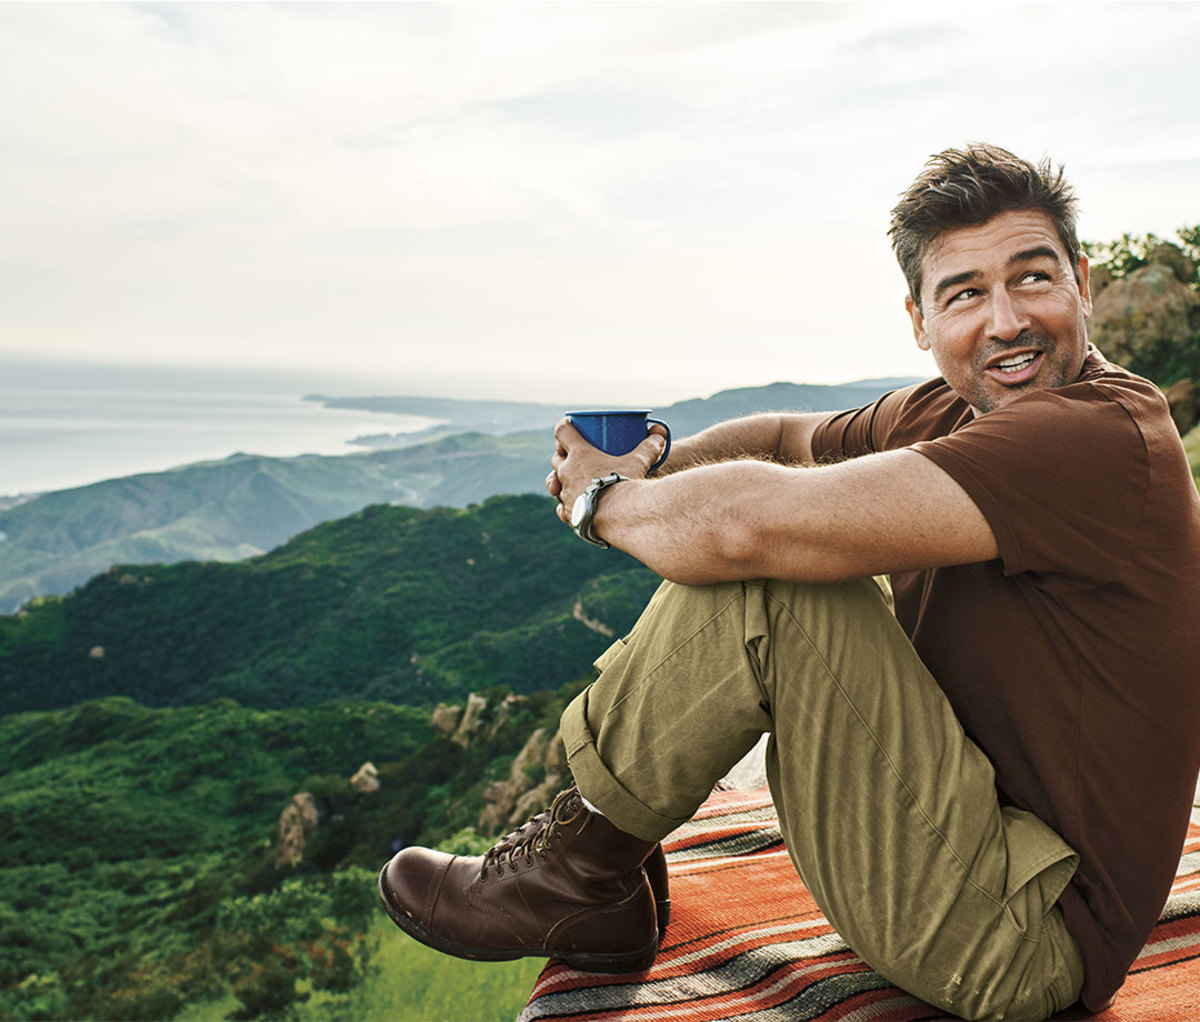 How to Get Kyle Chandler’s Hairstyle: The Kind of Hair You Need.